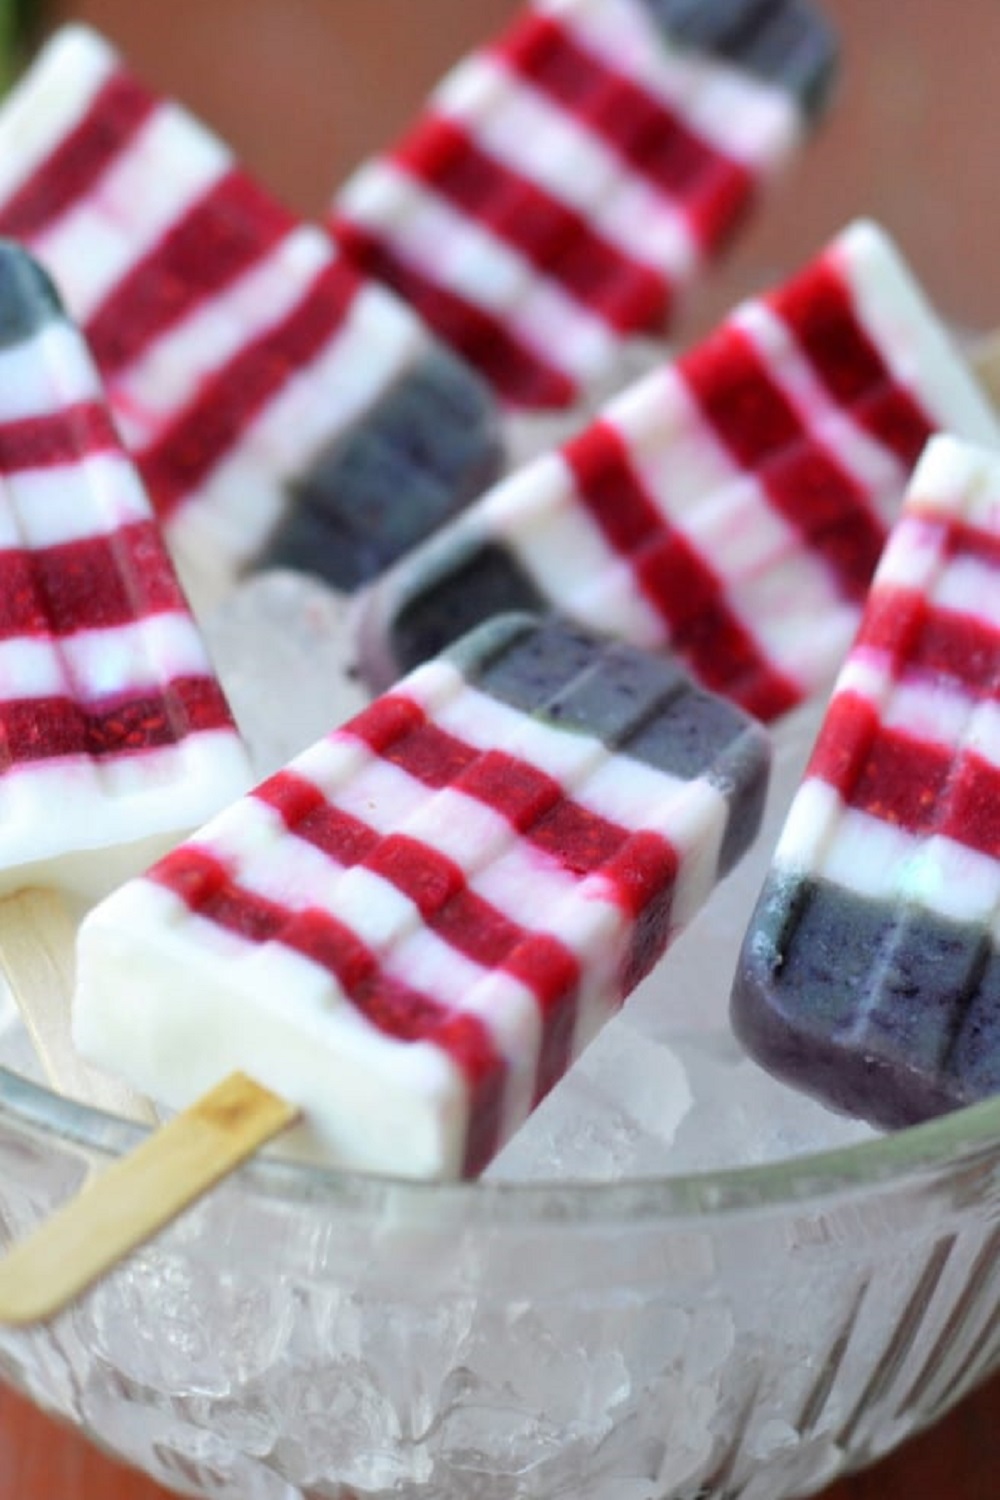 Best Healthy Red, White, and Blue Desserts for an All-American Summer